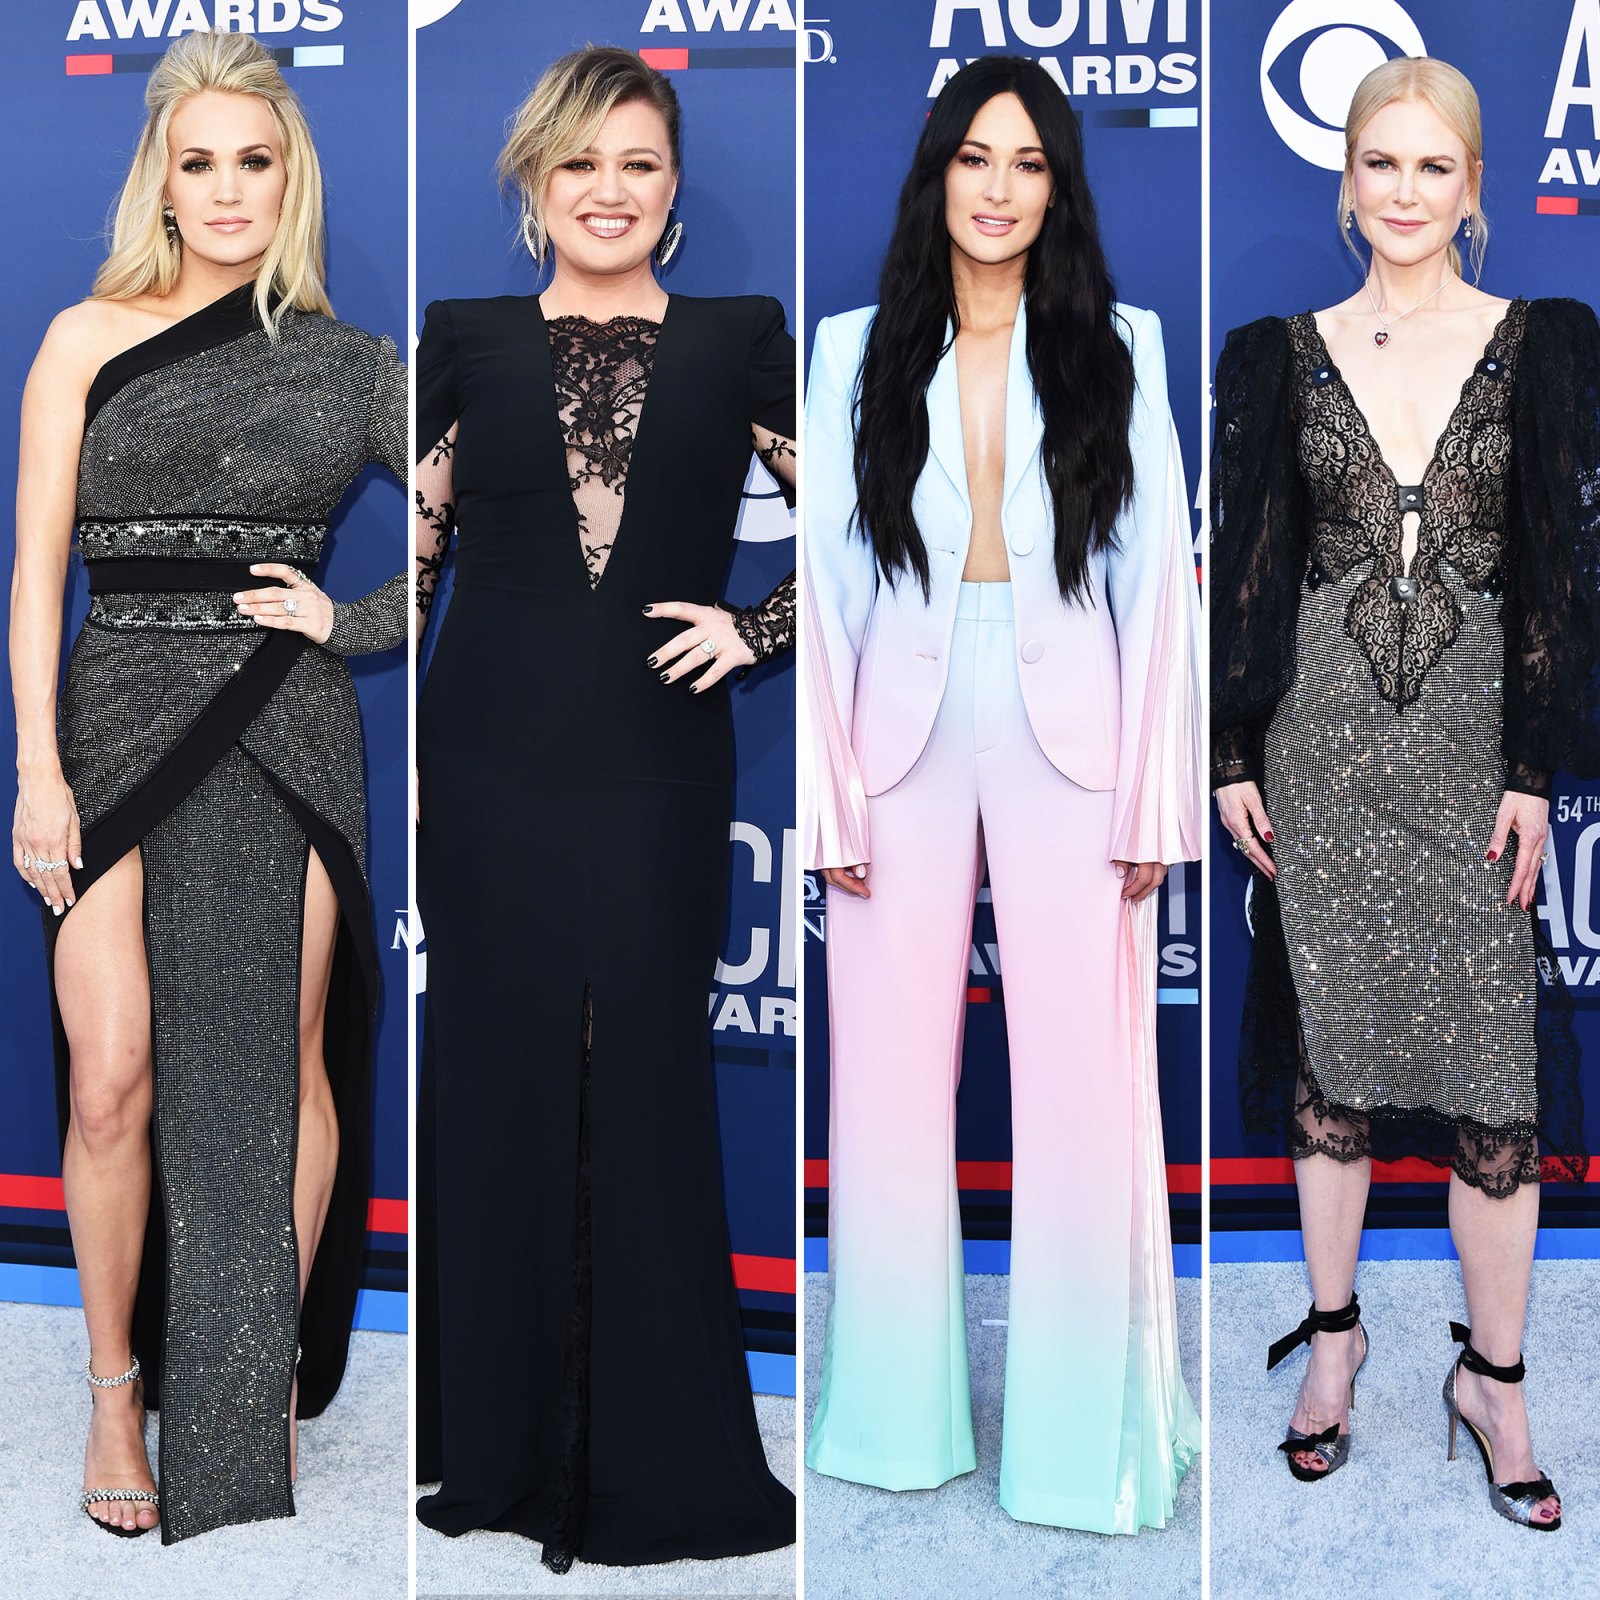 Carrie Underwood, Kelly Clarkson, Kacey Musgraves and Nicole KidmanThe Best Looks From the Country Music Awards Red Carpet